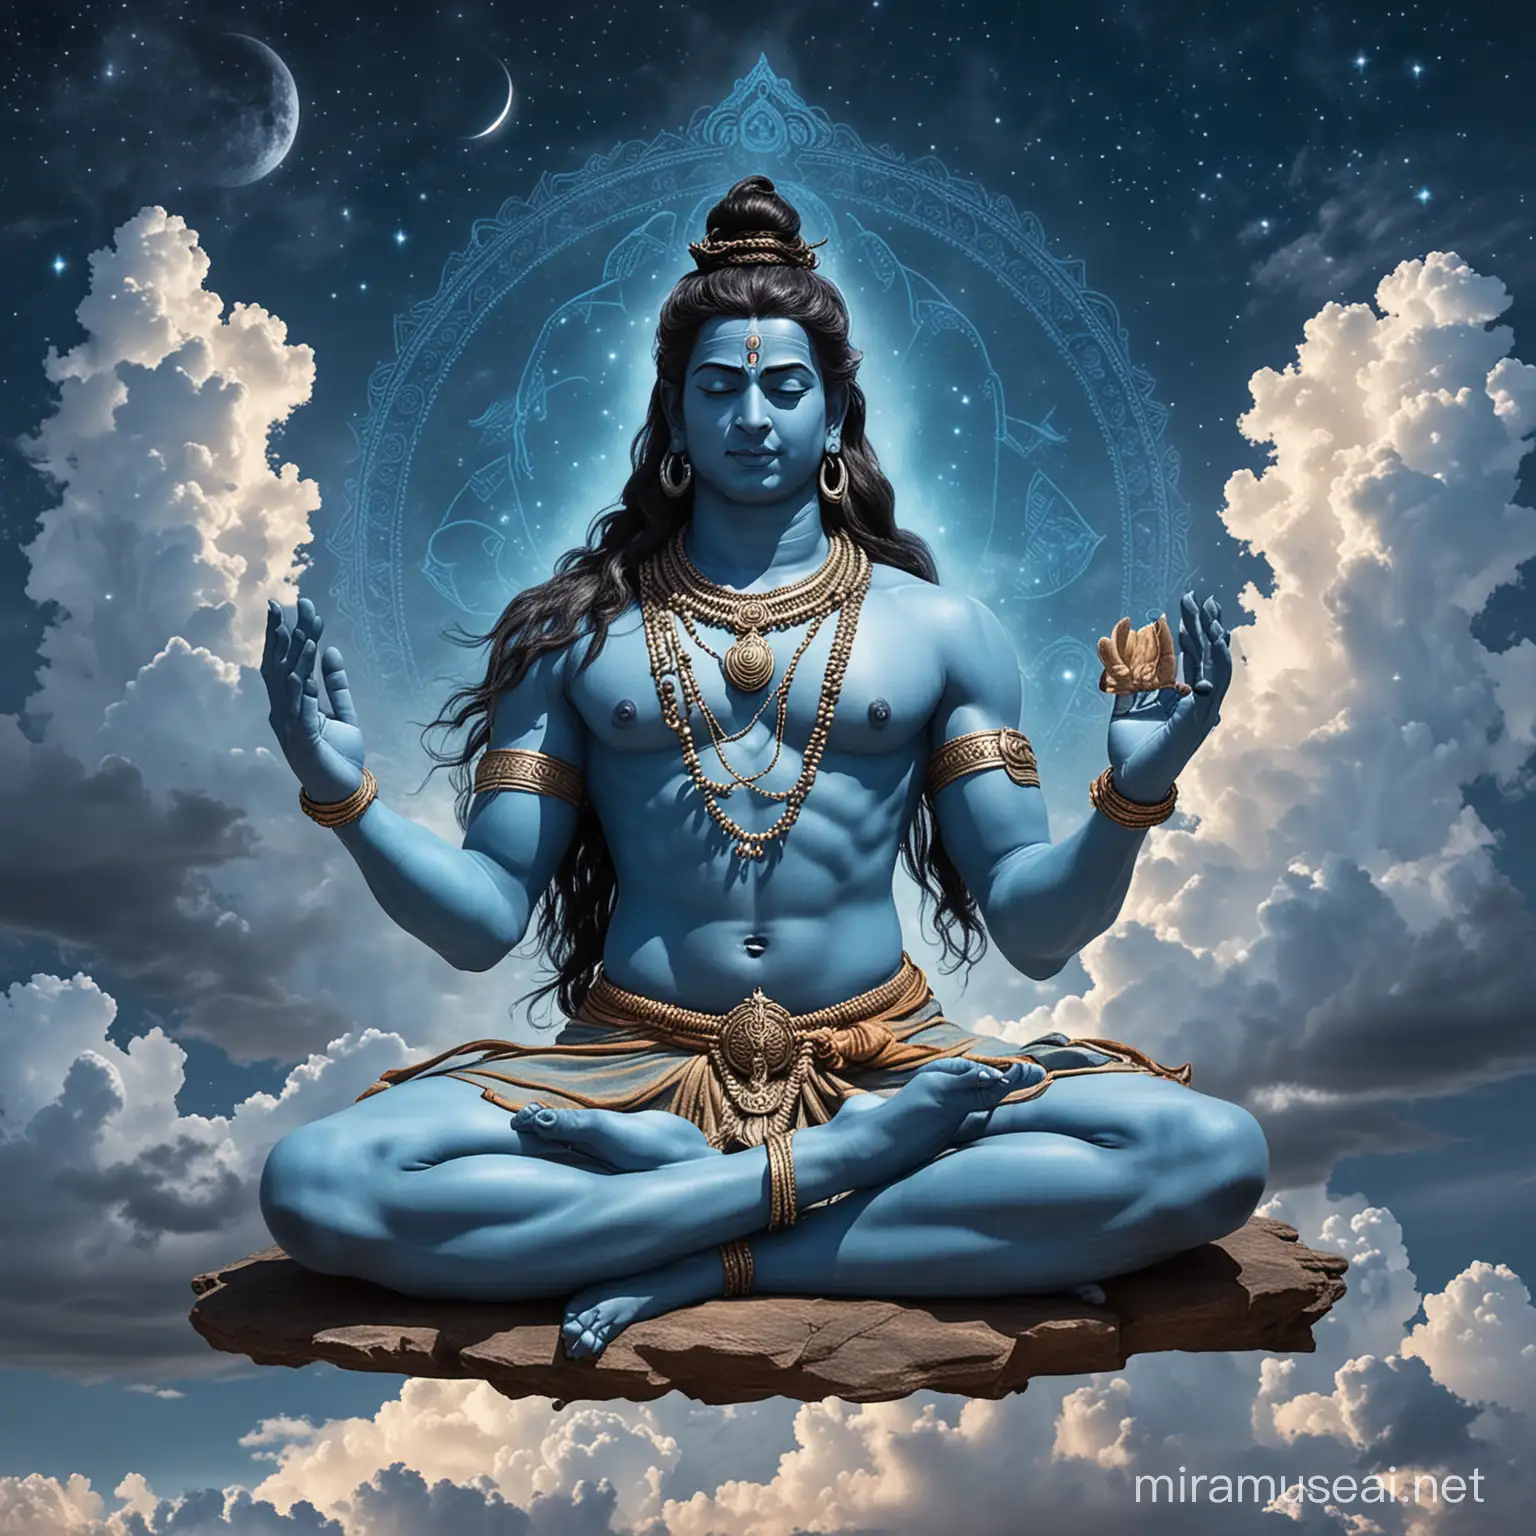 Serene Shiva Meditating on Vast Celestial Sky with Symbols and Homage from Celestial Beings